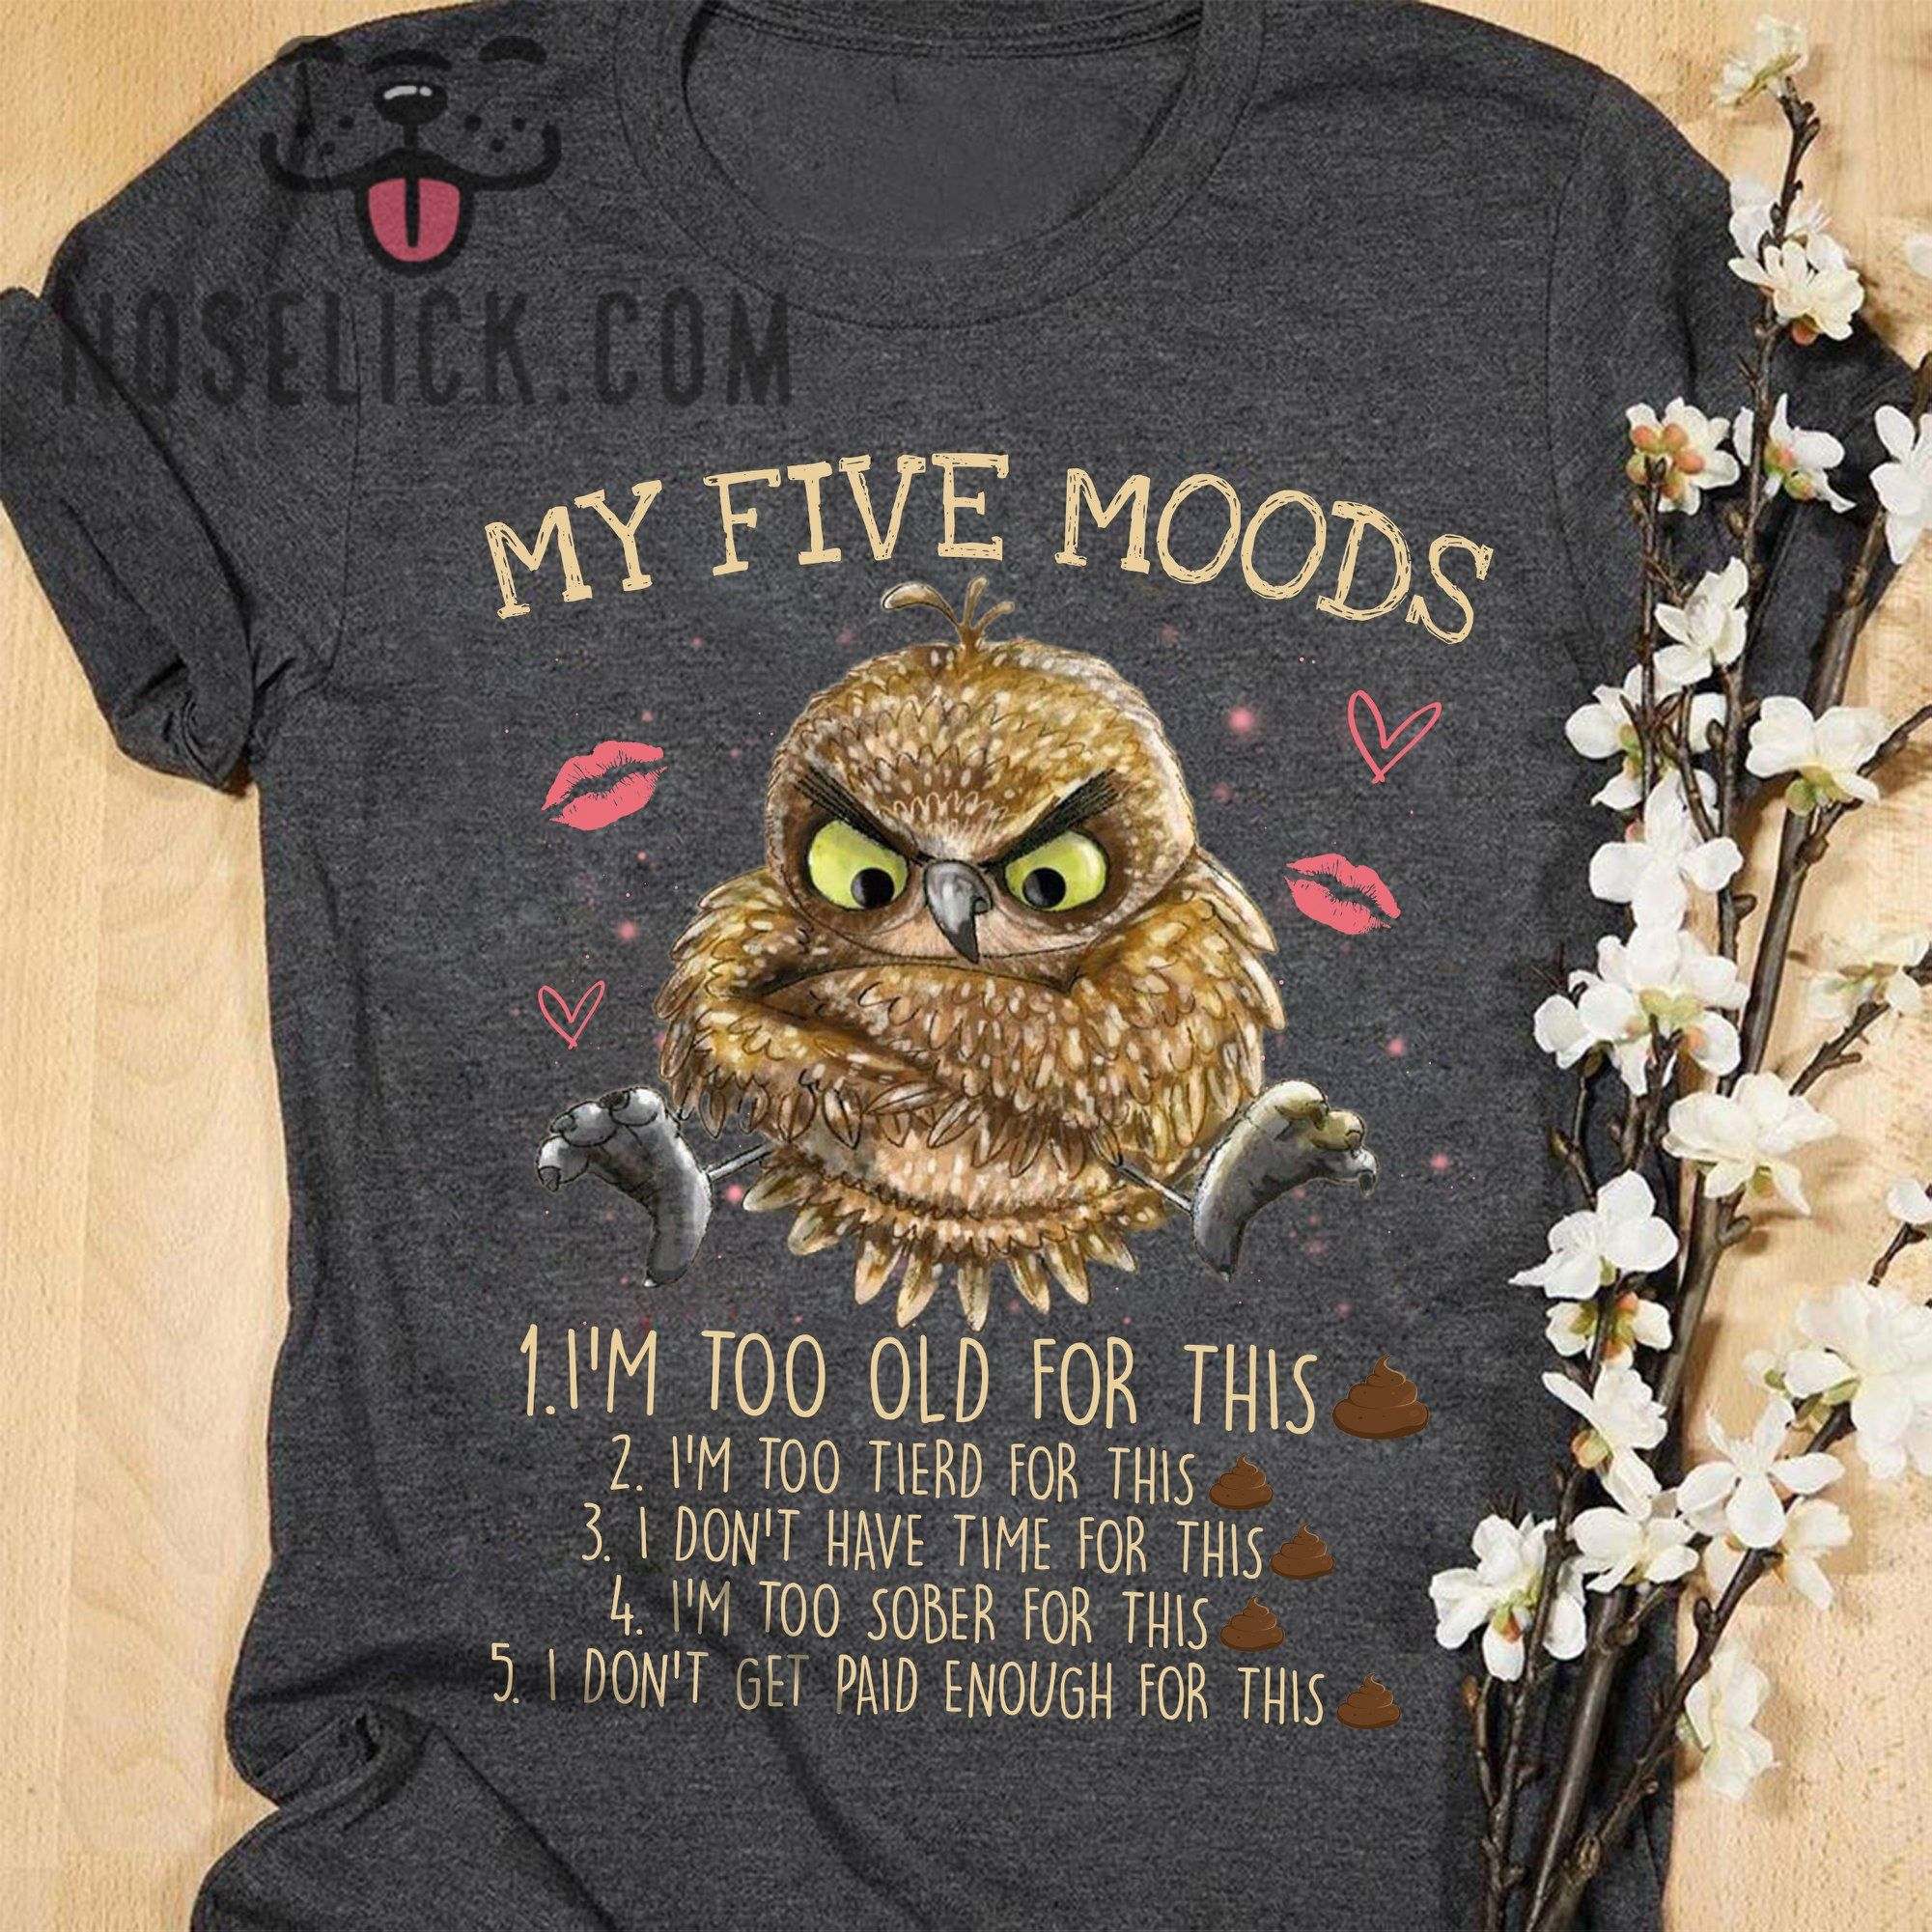 Love Owl - My life moods i'm too old for this i'm too tired for this